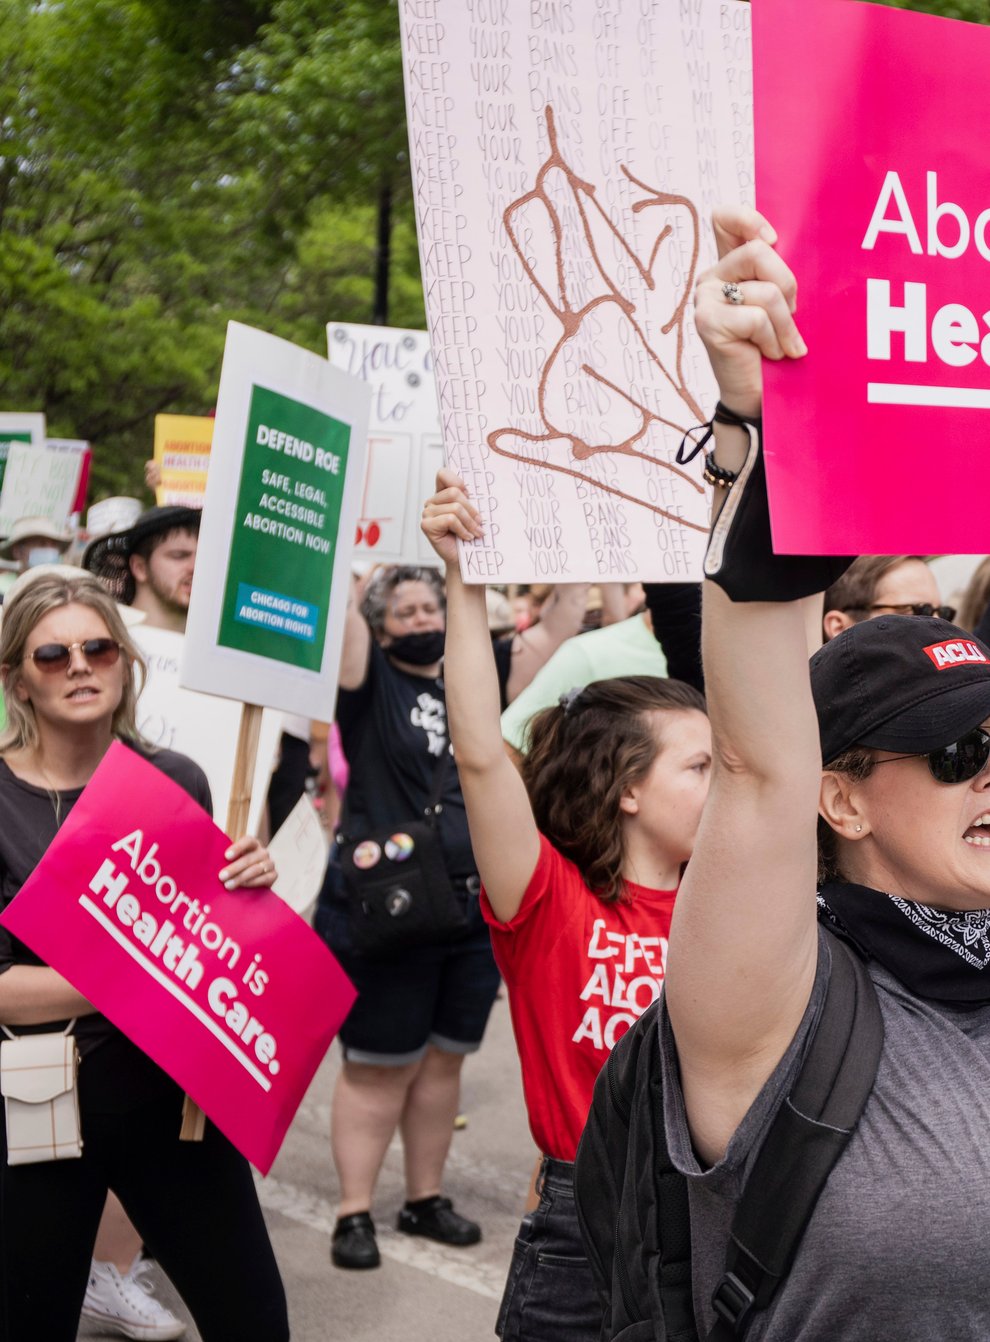 Abortion rights demonstrators rally in Chicago (Pat Nabong /Chicago Sun-Times via AP)